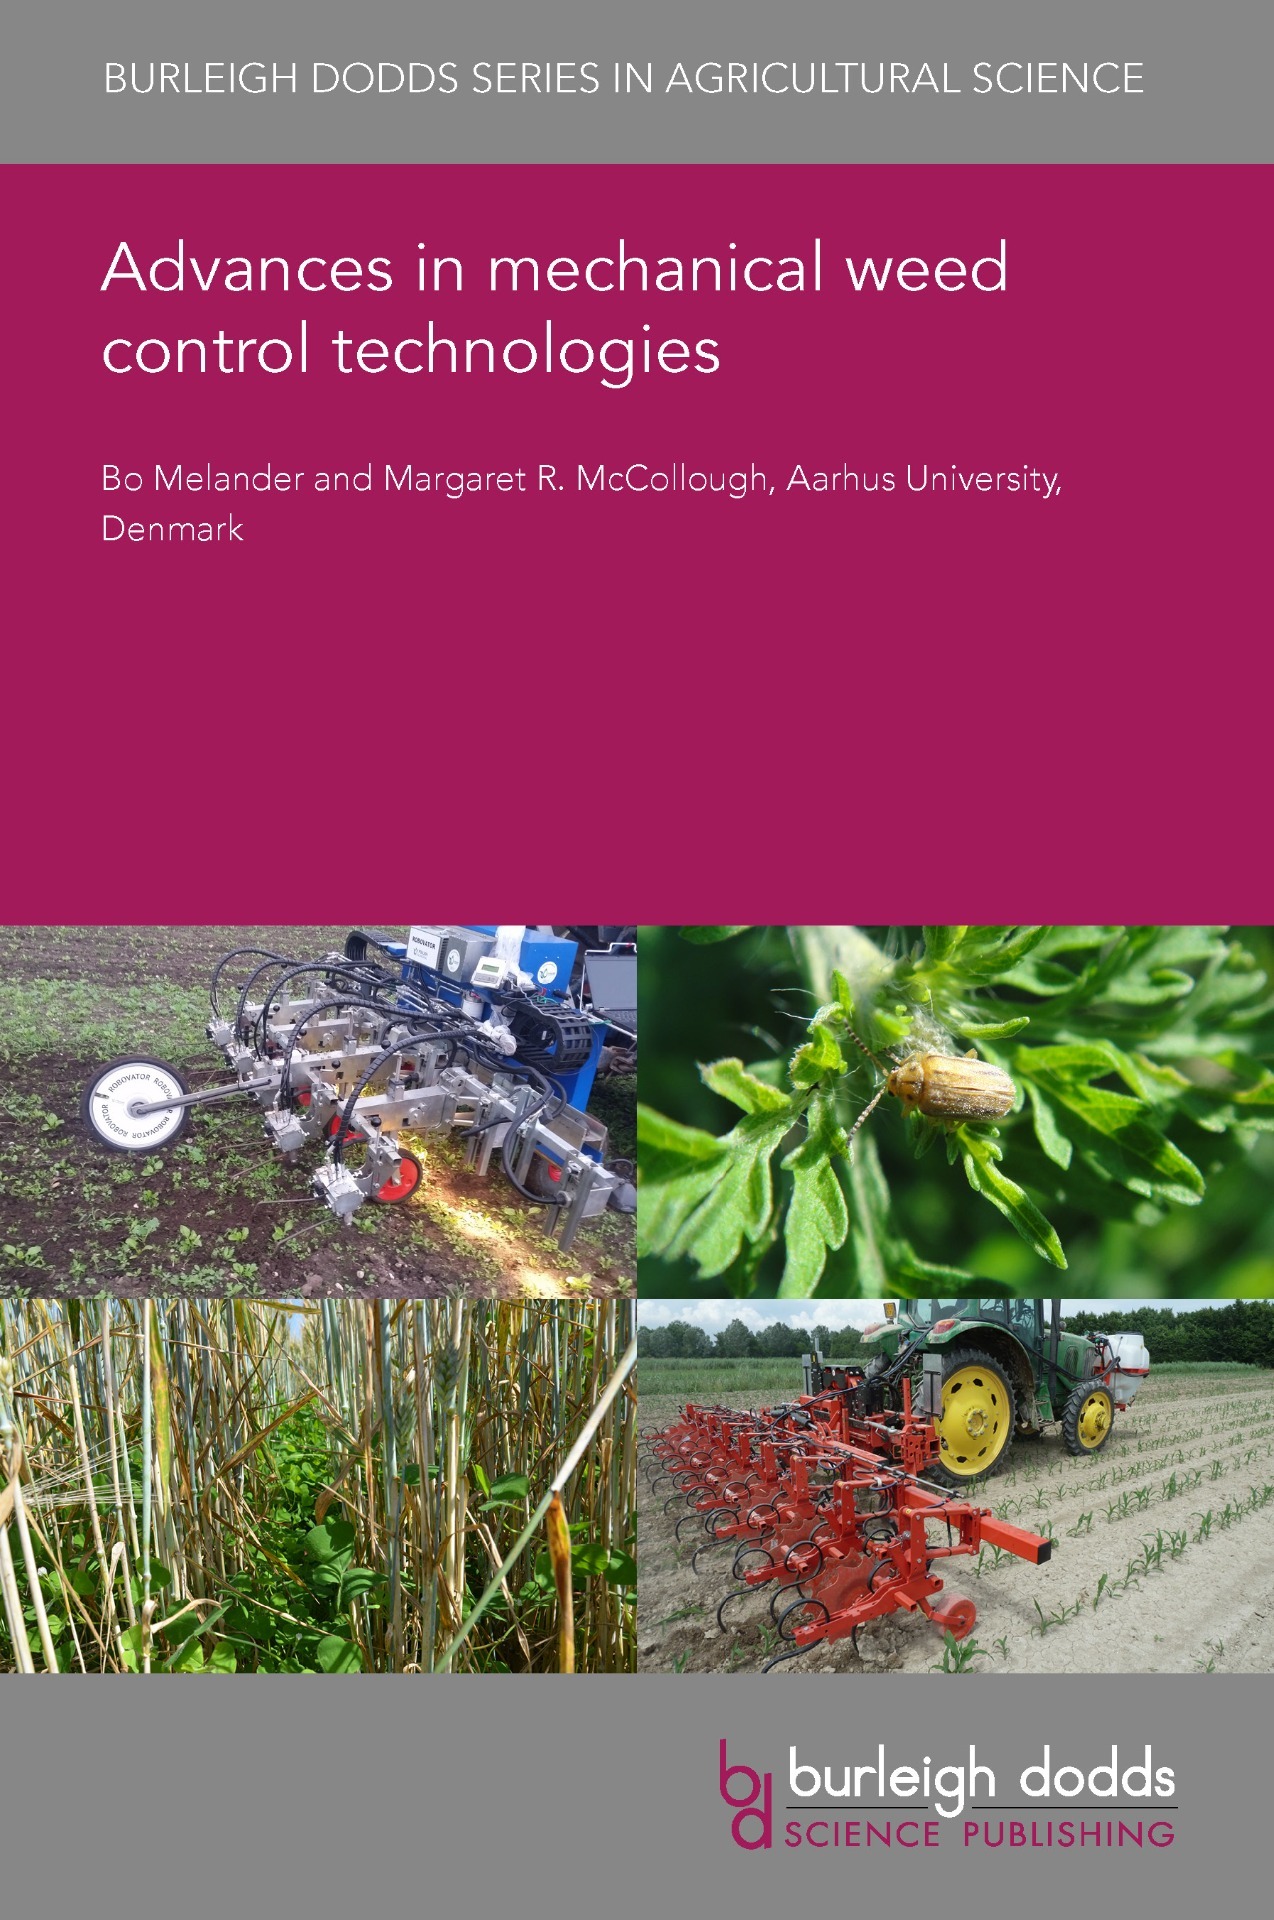 Advances in mechanical weed control technologies